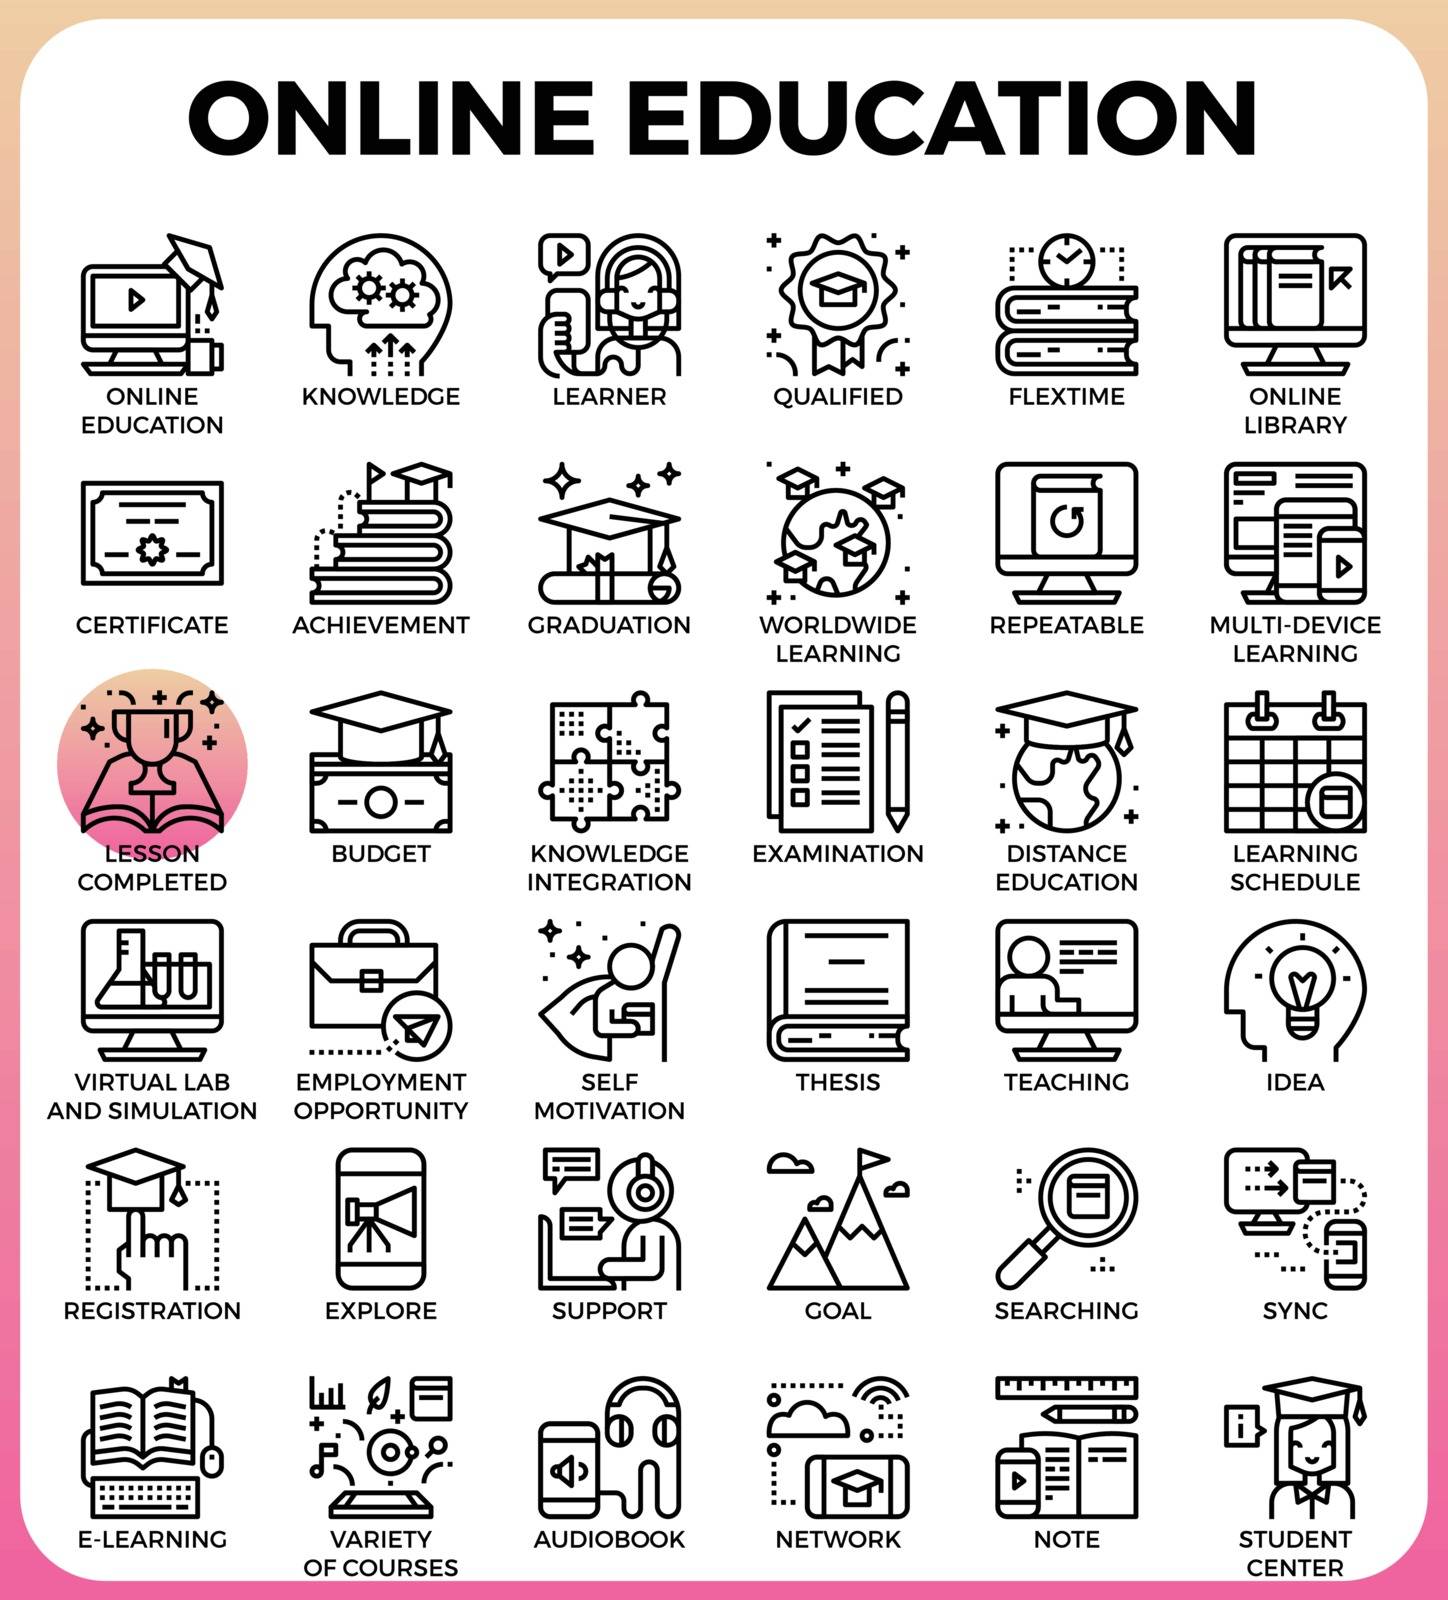 Online Education by nongpimmy